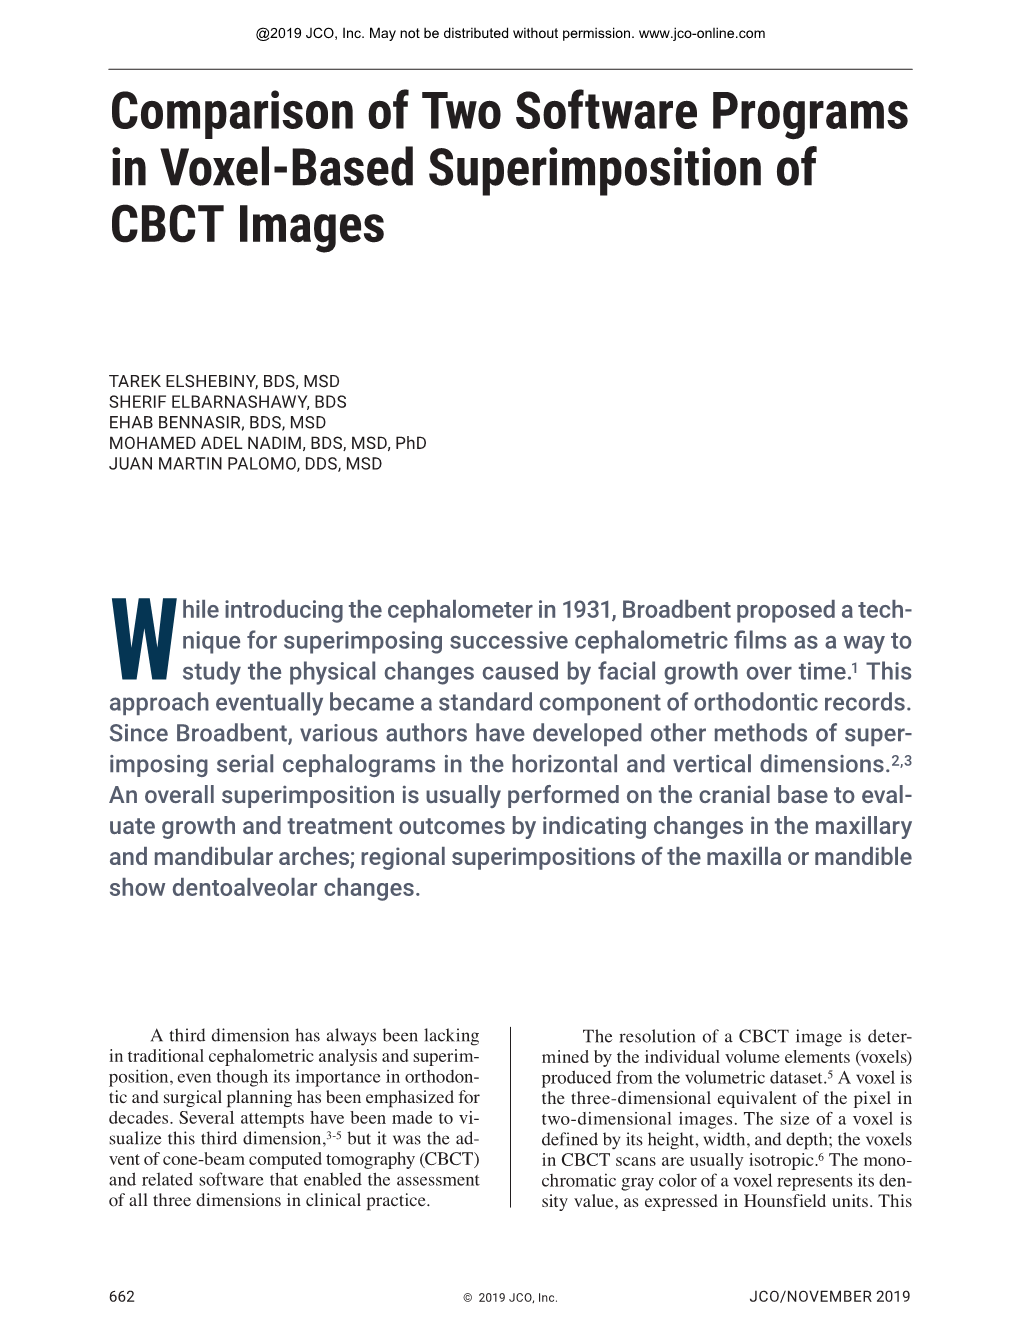 Comparison of Two Software Programs in Voxel-Based Superimposition of CBCT Images